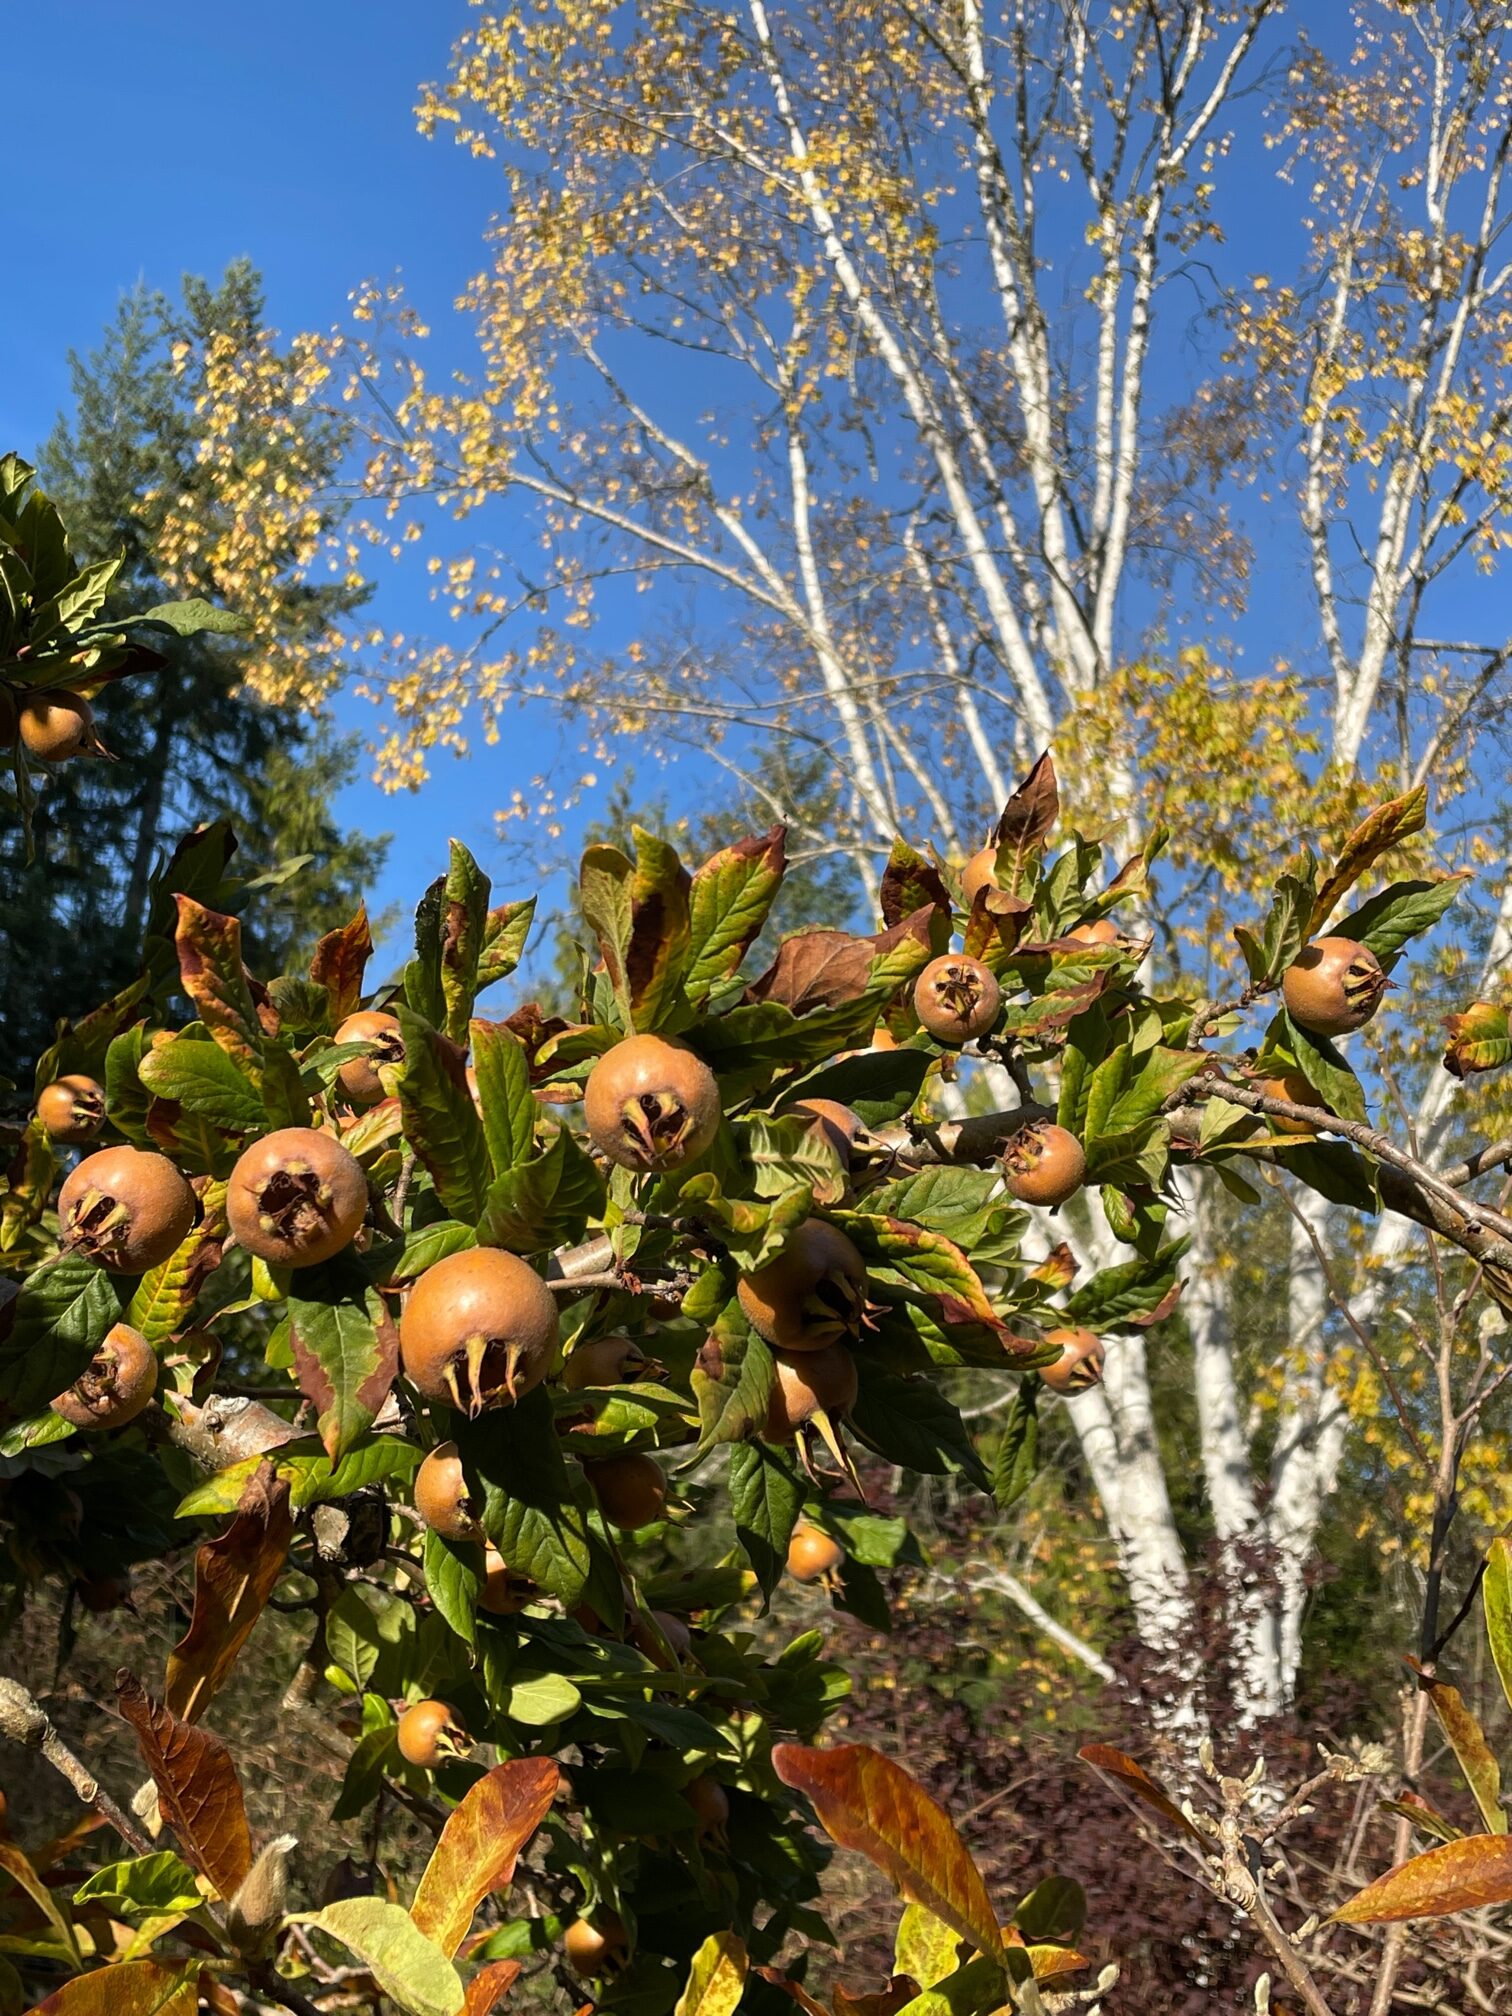 A photograph of a medlar branch bearing brown fruit that look very similar to rosehips. In the background is a tall white Himalayan Birch Tree and blue sky.